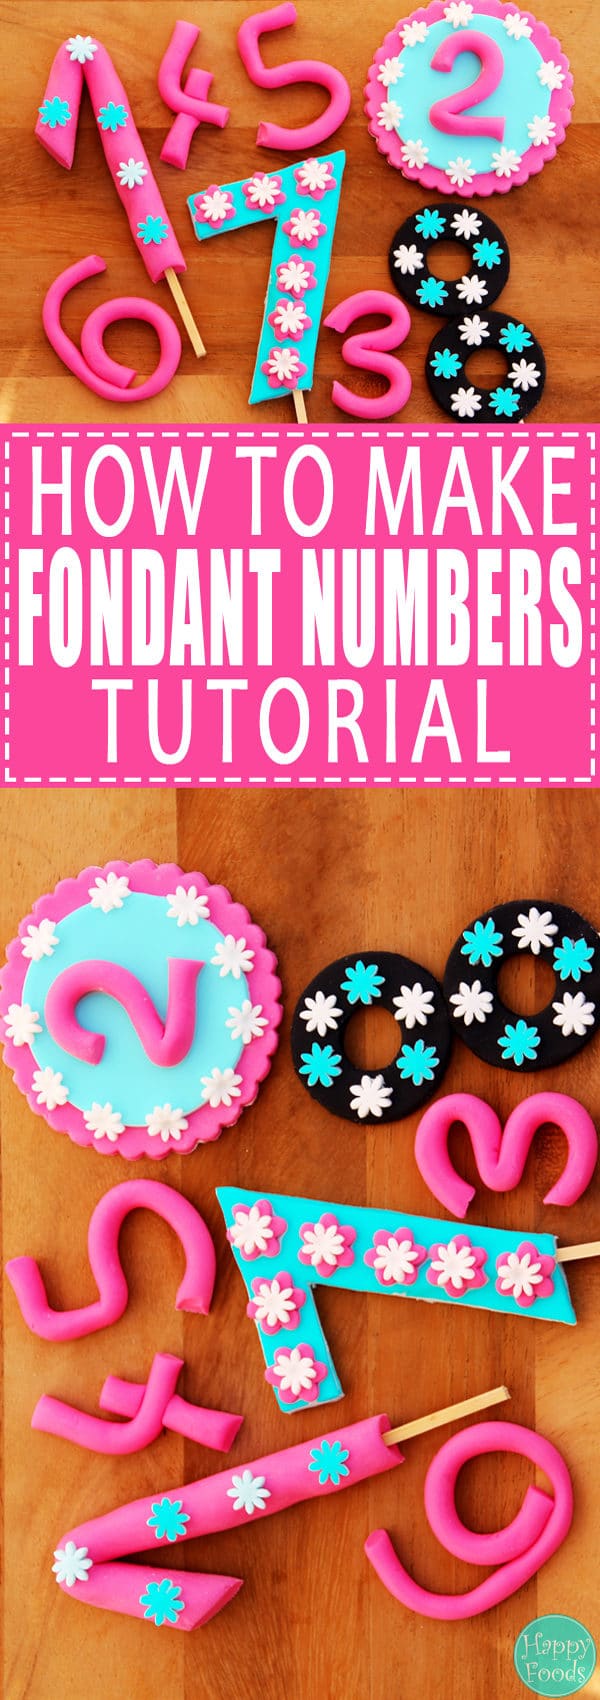 How to Make Fondant Numbers for Birthday Cake - Easy cake decorating tutorial! Learn how to decorate your cake! | happyfoodstube.com